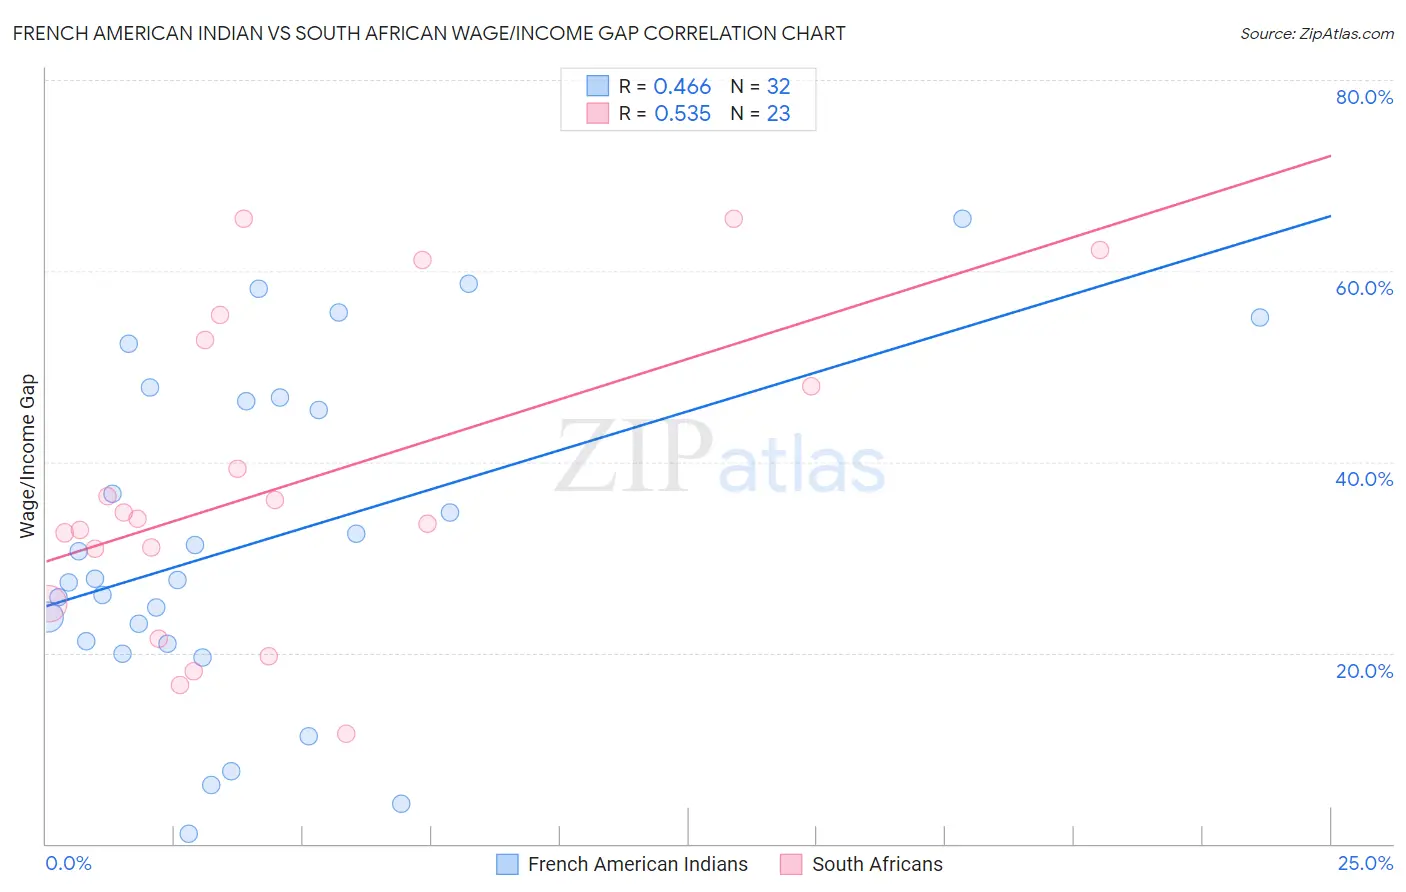 French American Indian vs South African Wage/Income Gap